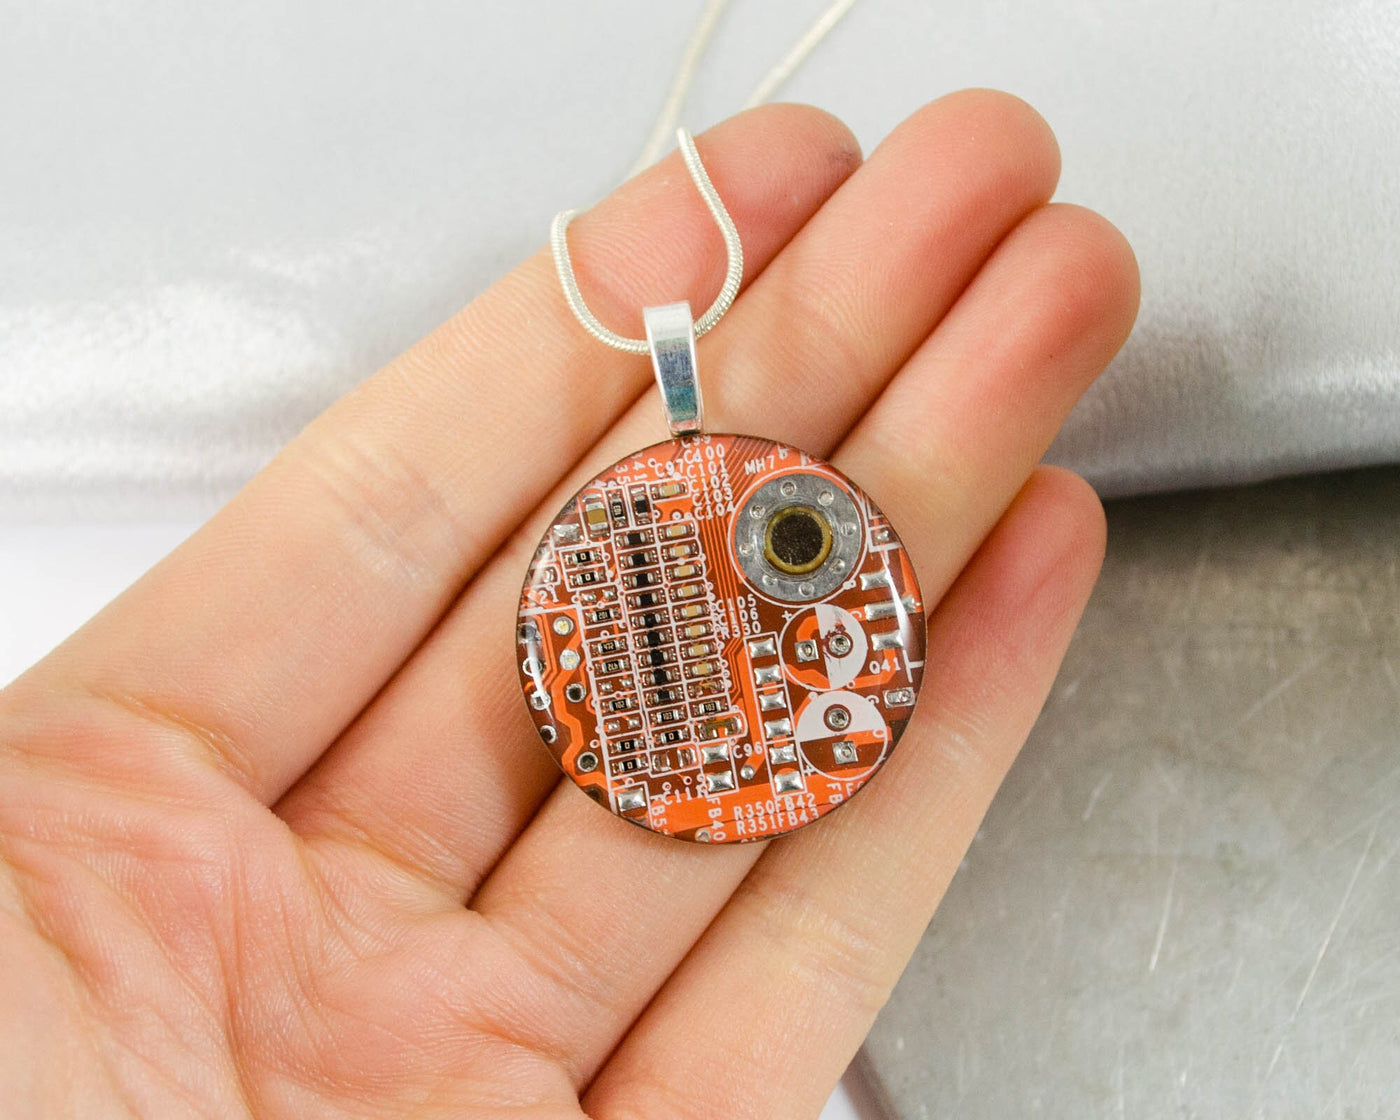 Large Circuit Board Necklace Orange, Recycled Motherboard Jewelry, Electrical Engineer Necklace, Geek Chic Jewelry, Upcycled PCB Neckalce